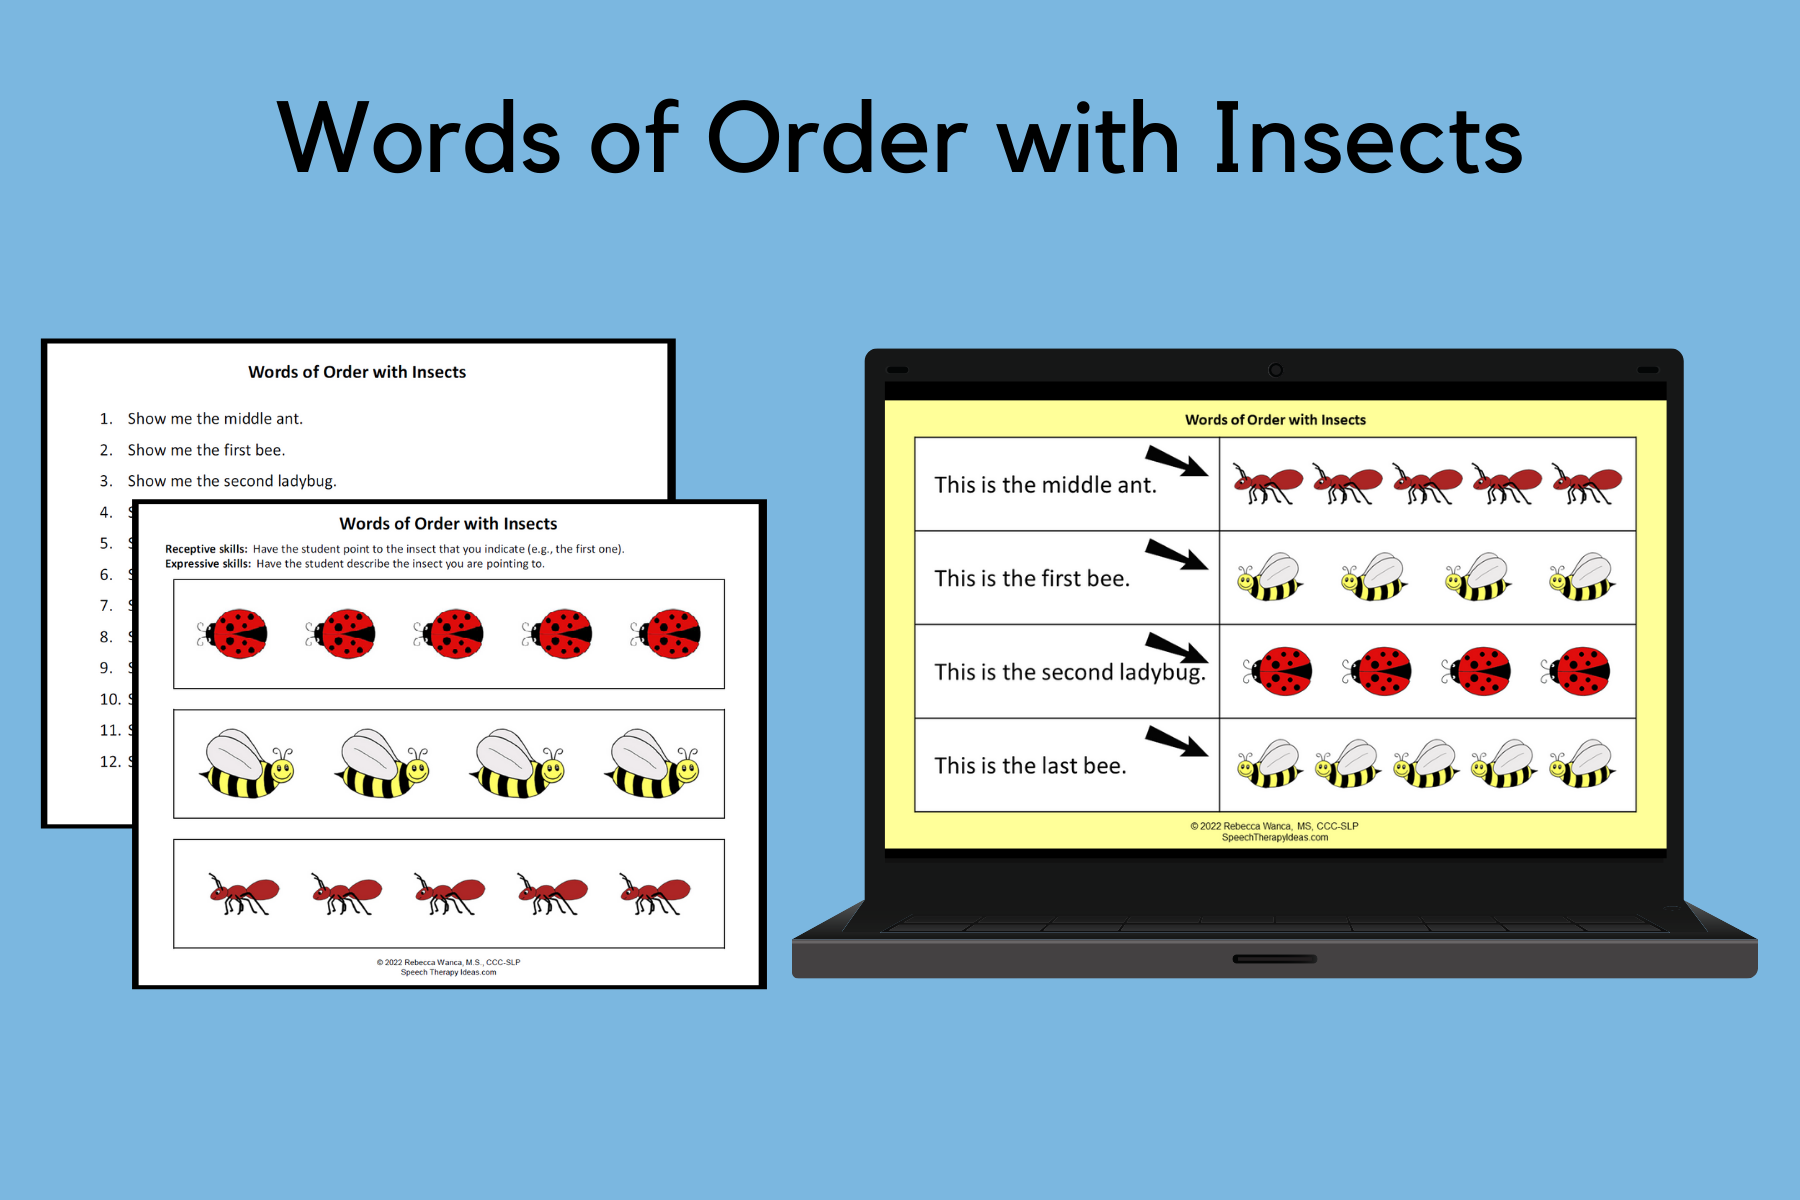 Words of Order with Insects